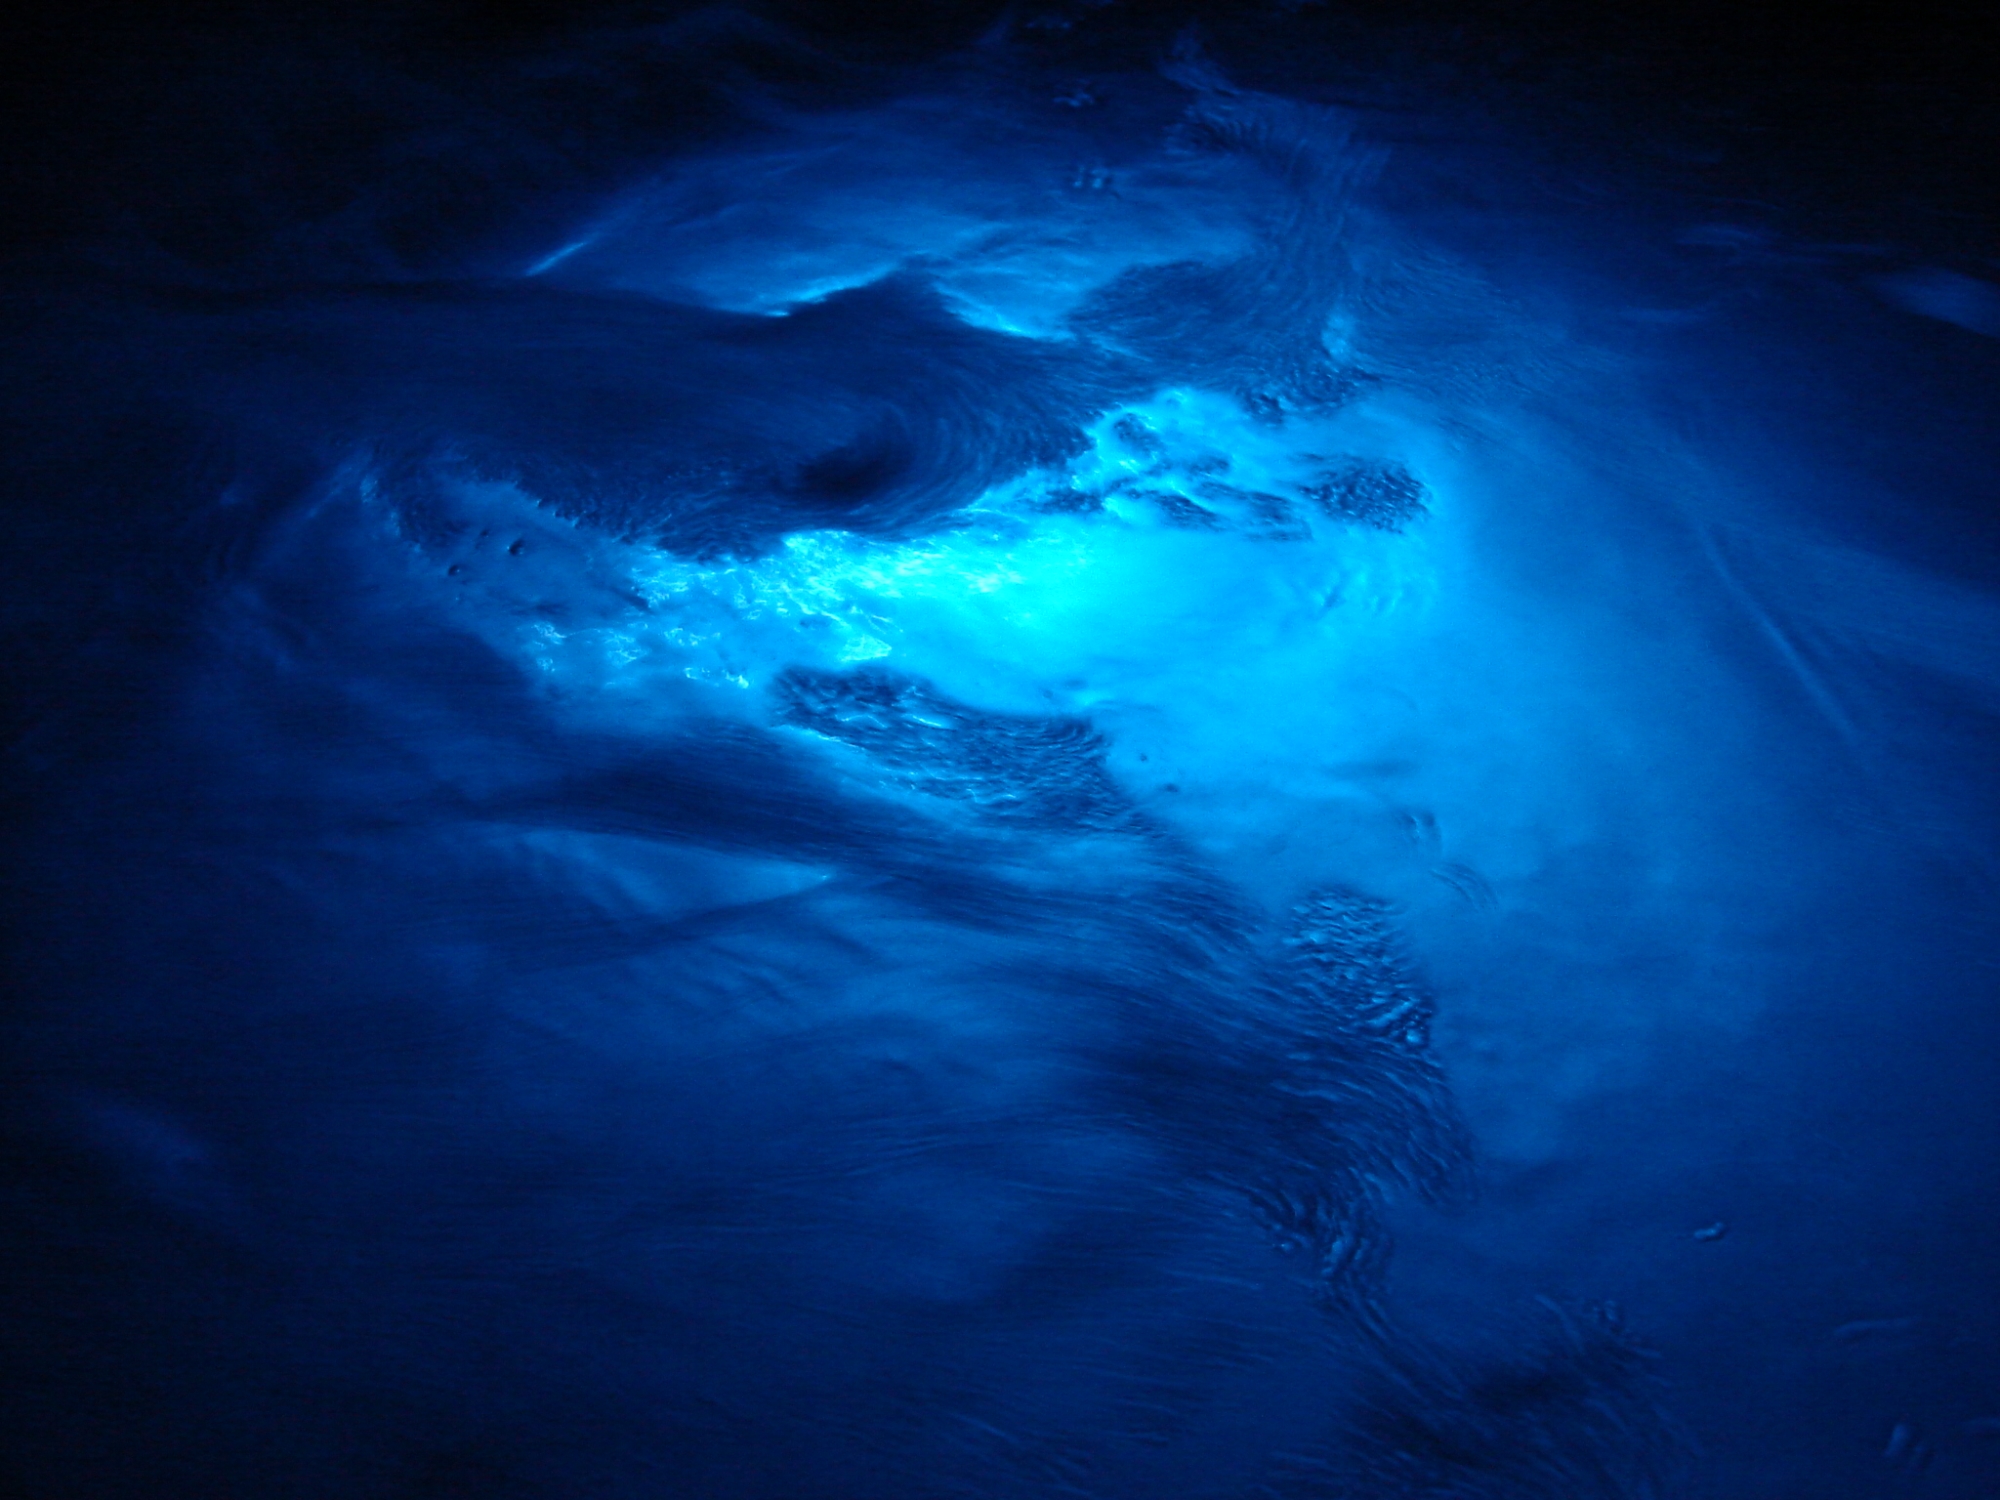 Gushing Blue Water Texture 02 by FantasyStock on DeviantArt